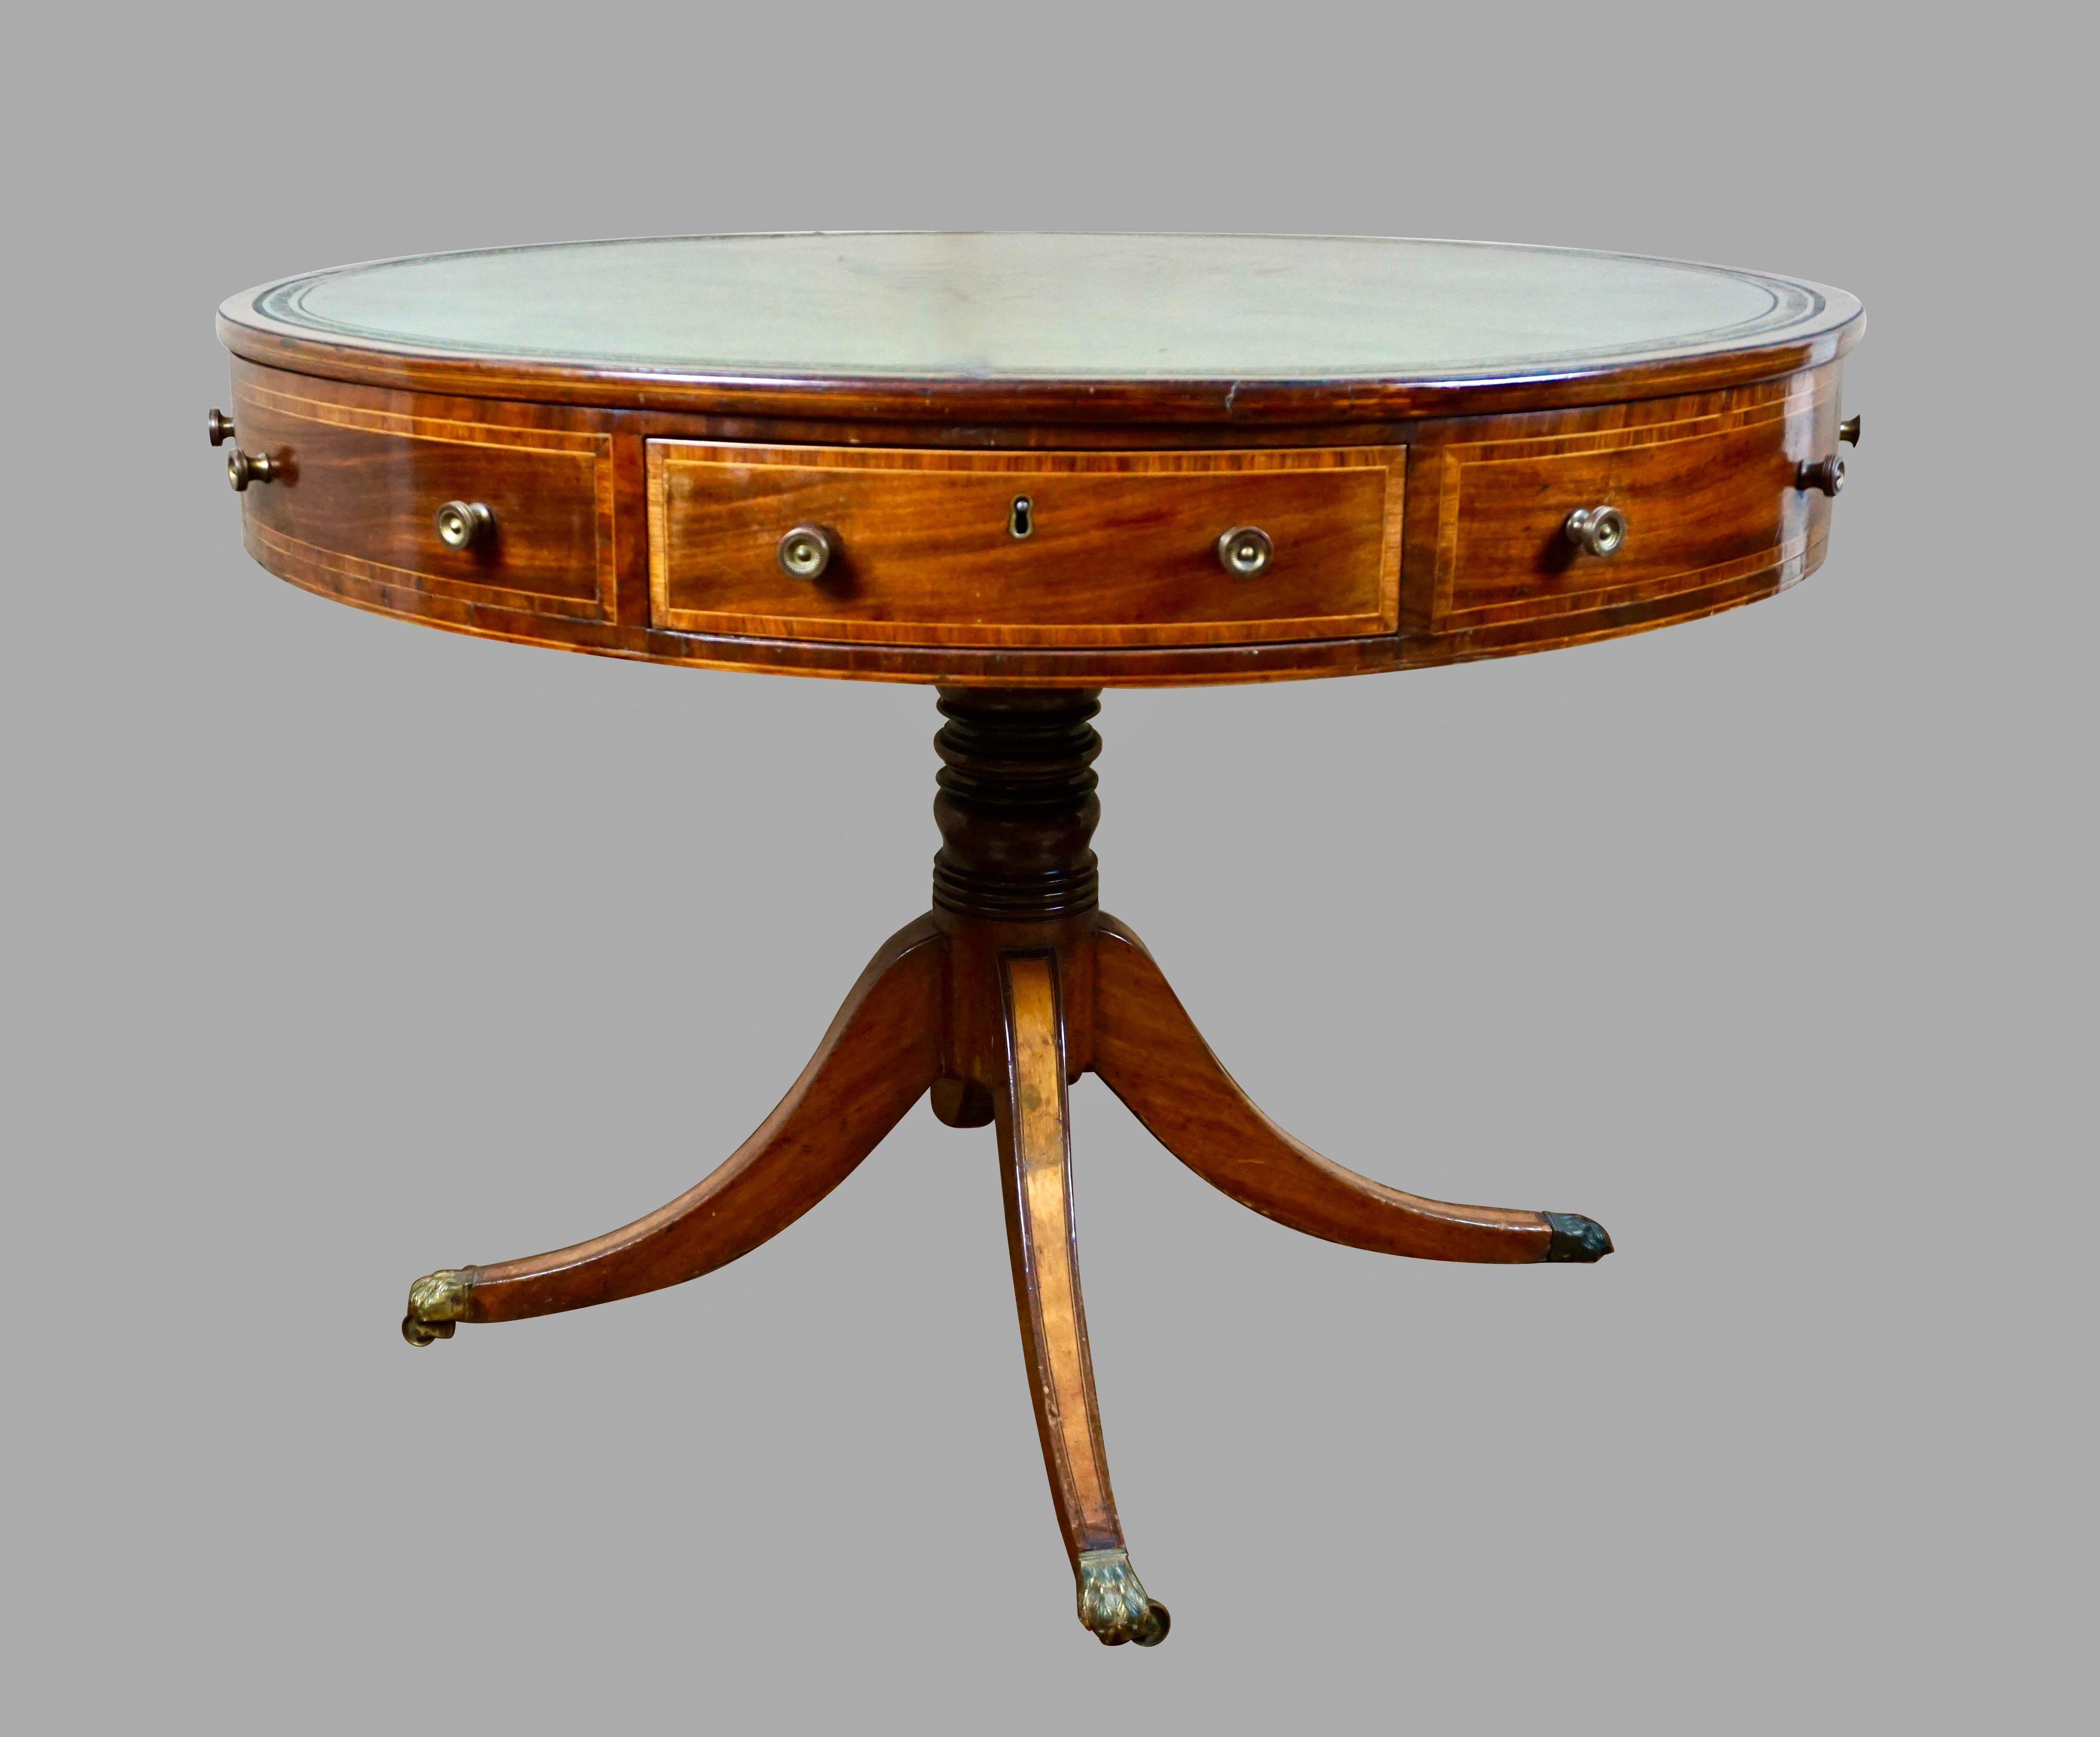 A good quality English late Regency period mahogany drum table, the rotating tooled green leather top over 4 real and 4 dummy drawers, each with satinwood crossbanding. The whole is supported on a tripartite base with satinwood inlaid downswept legs